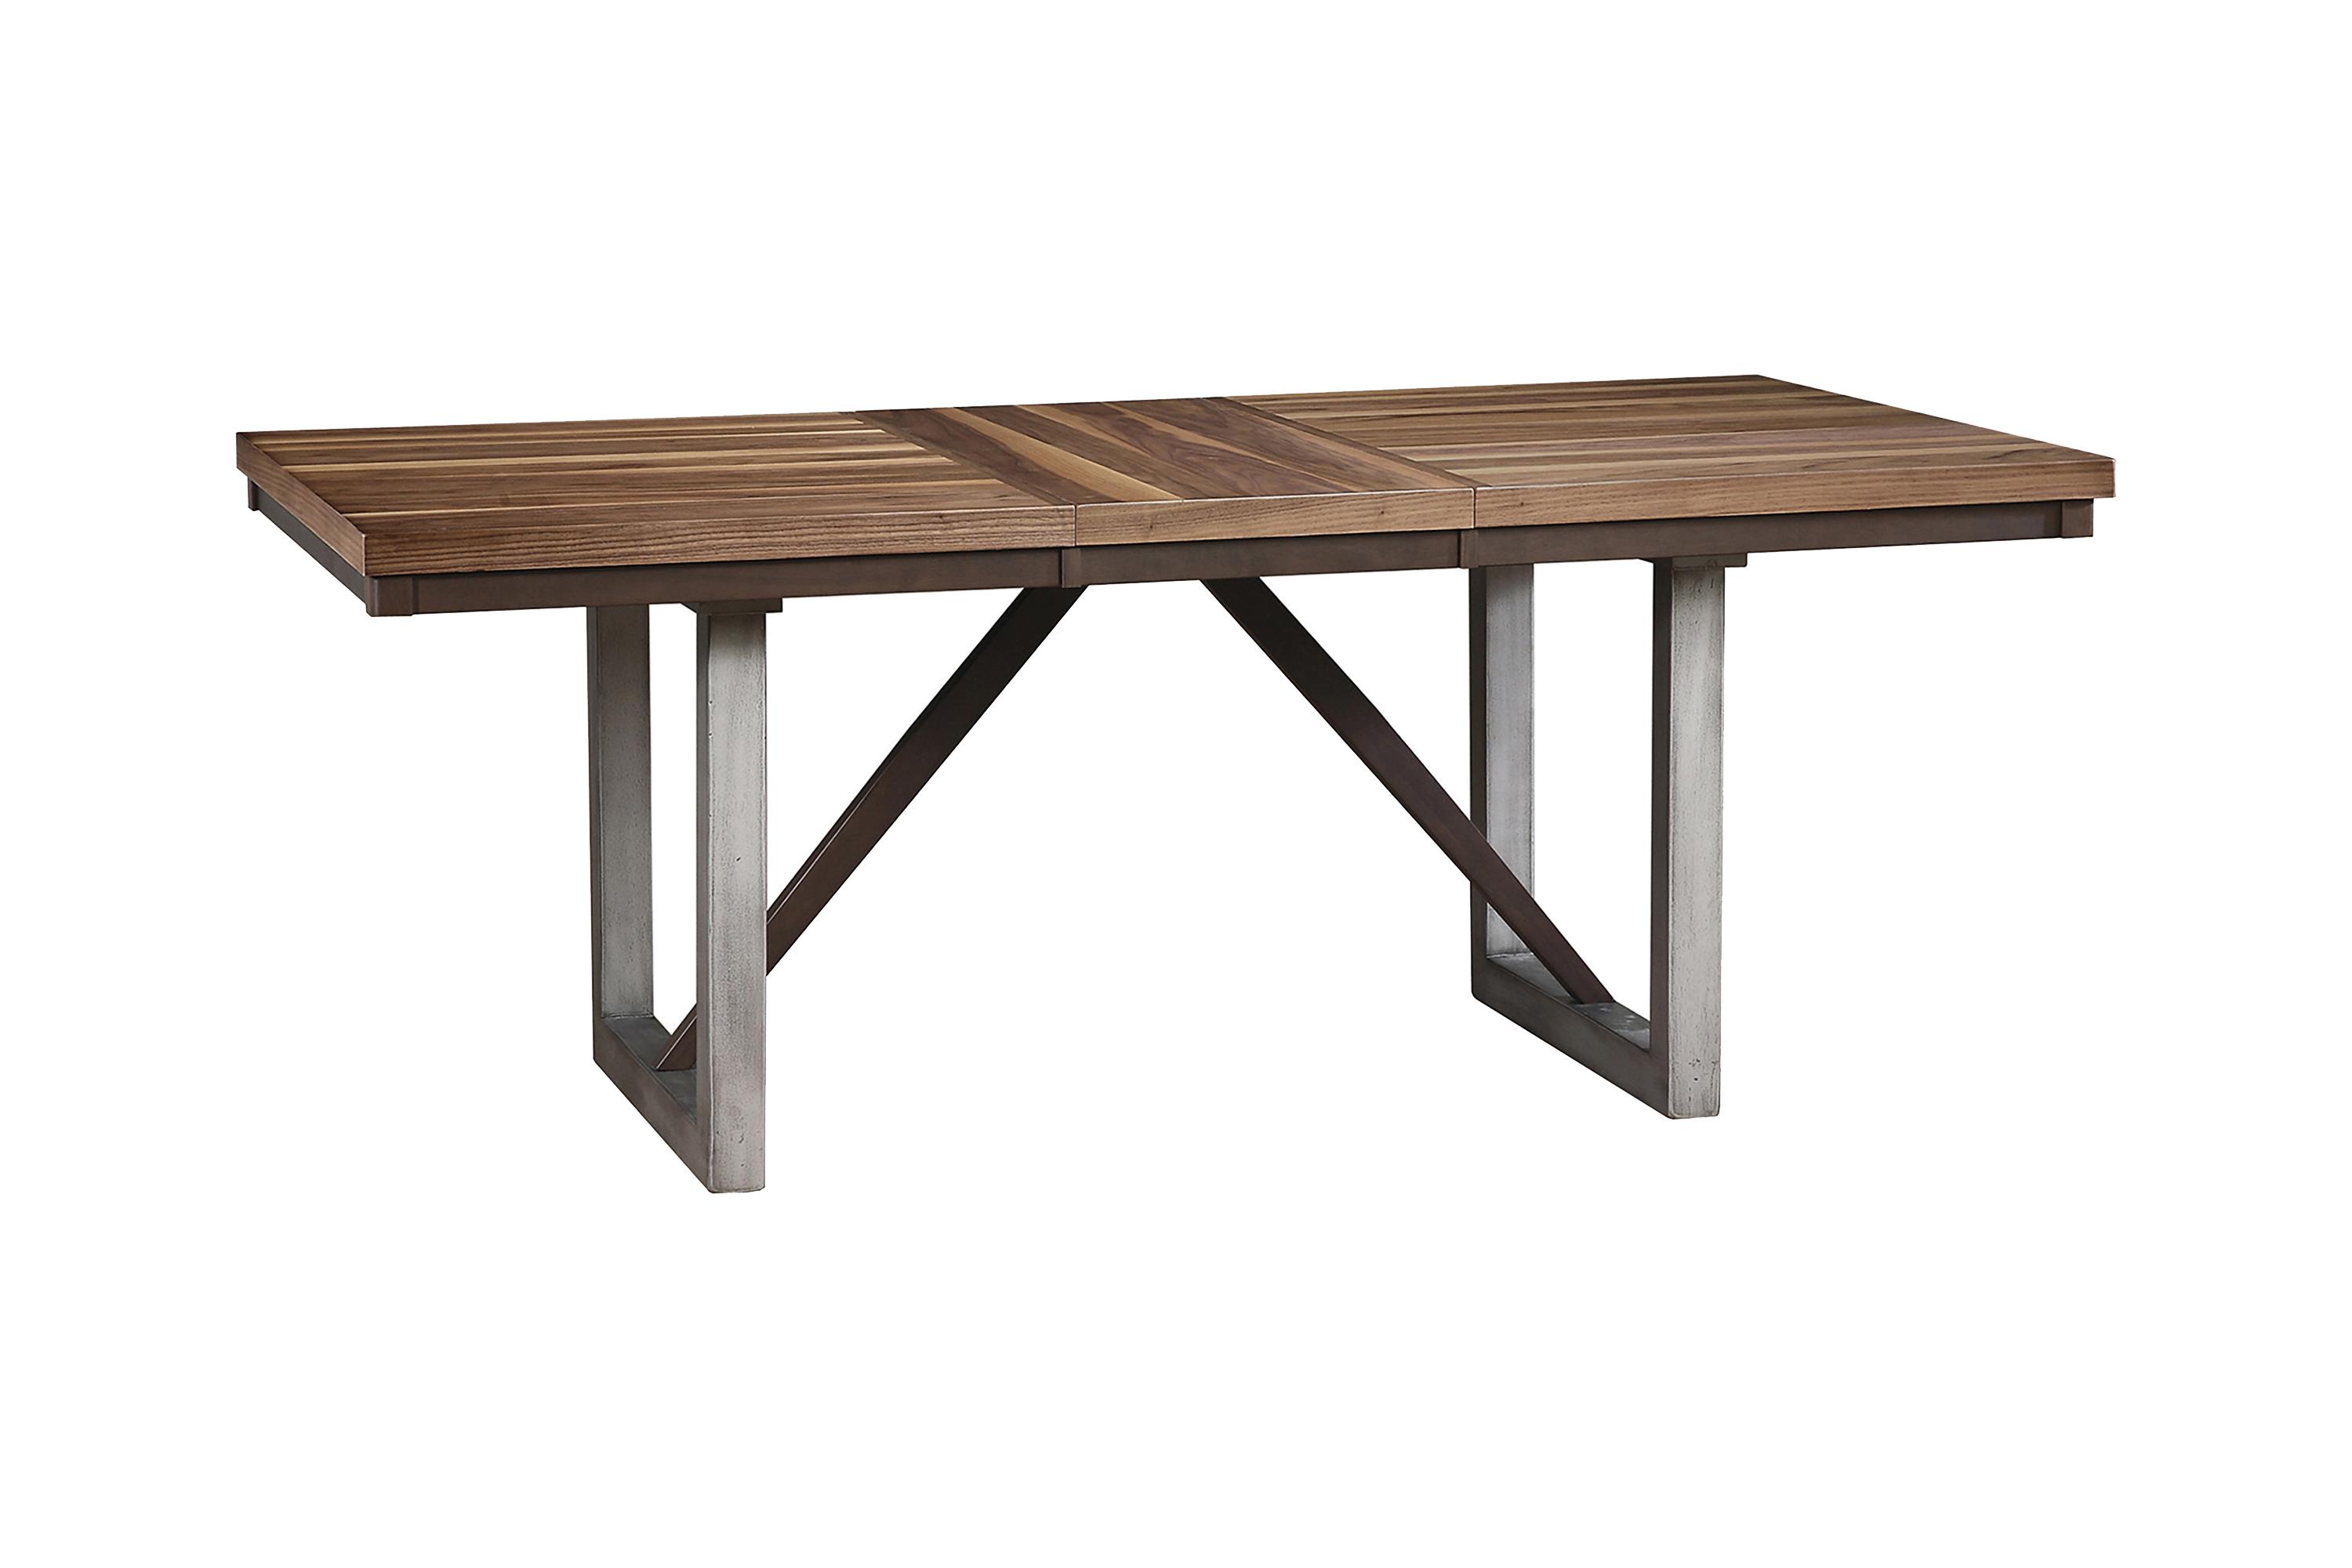 Transitional Dining Table 106581 Spring Creek 106581 in Espresso 